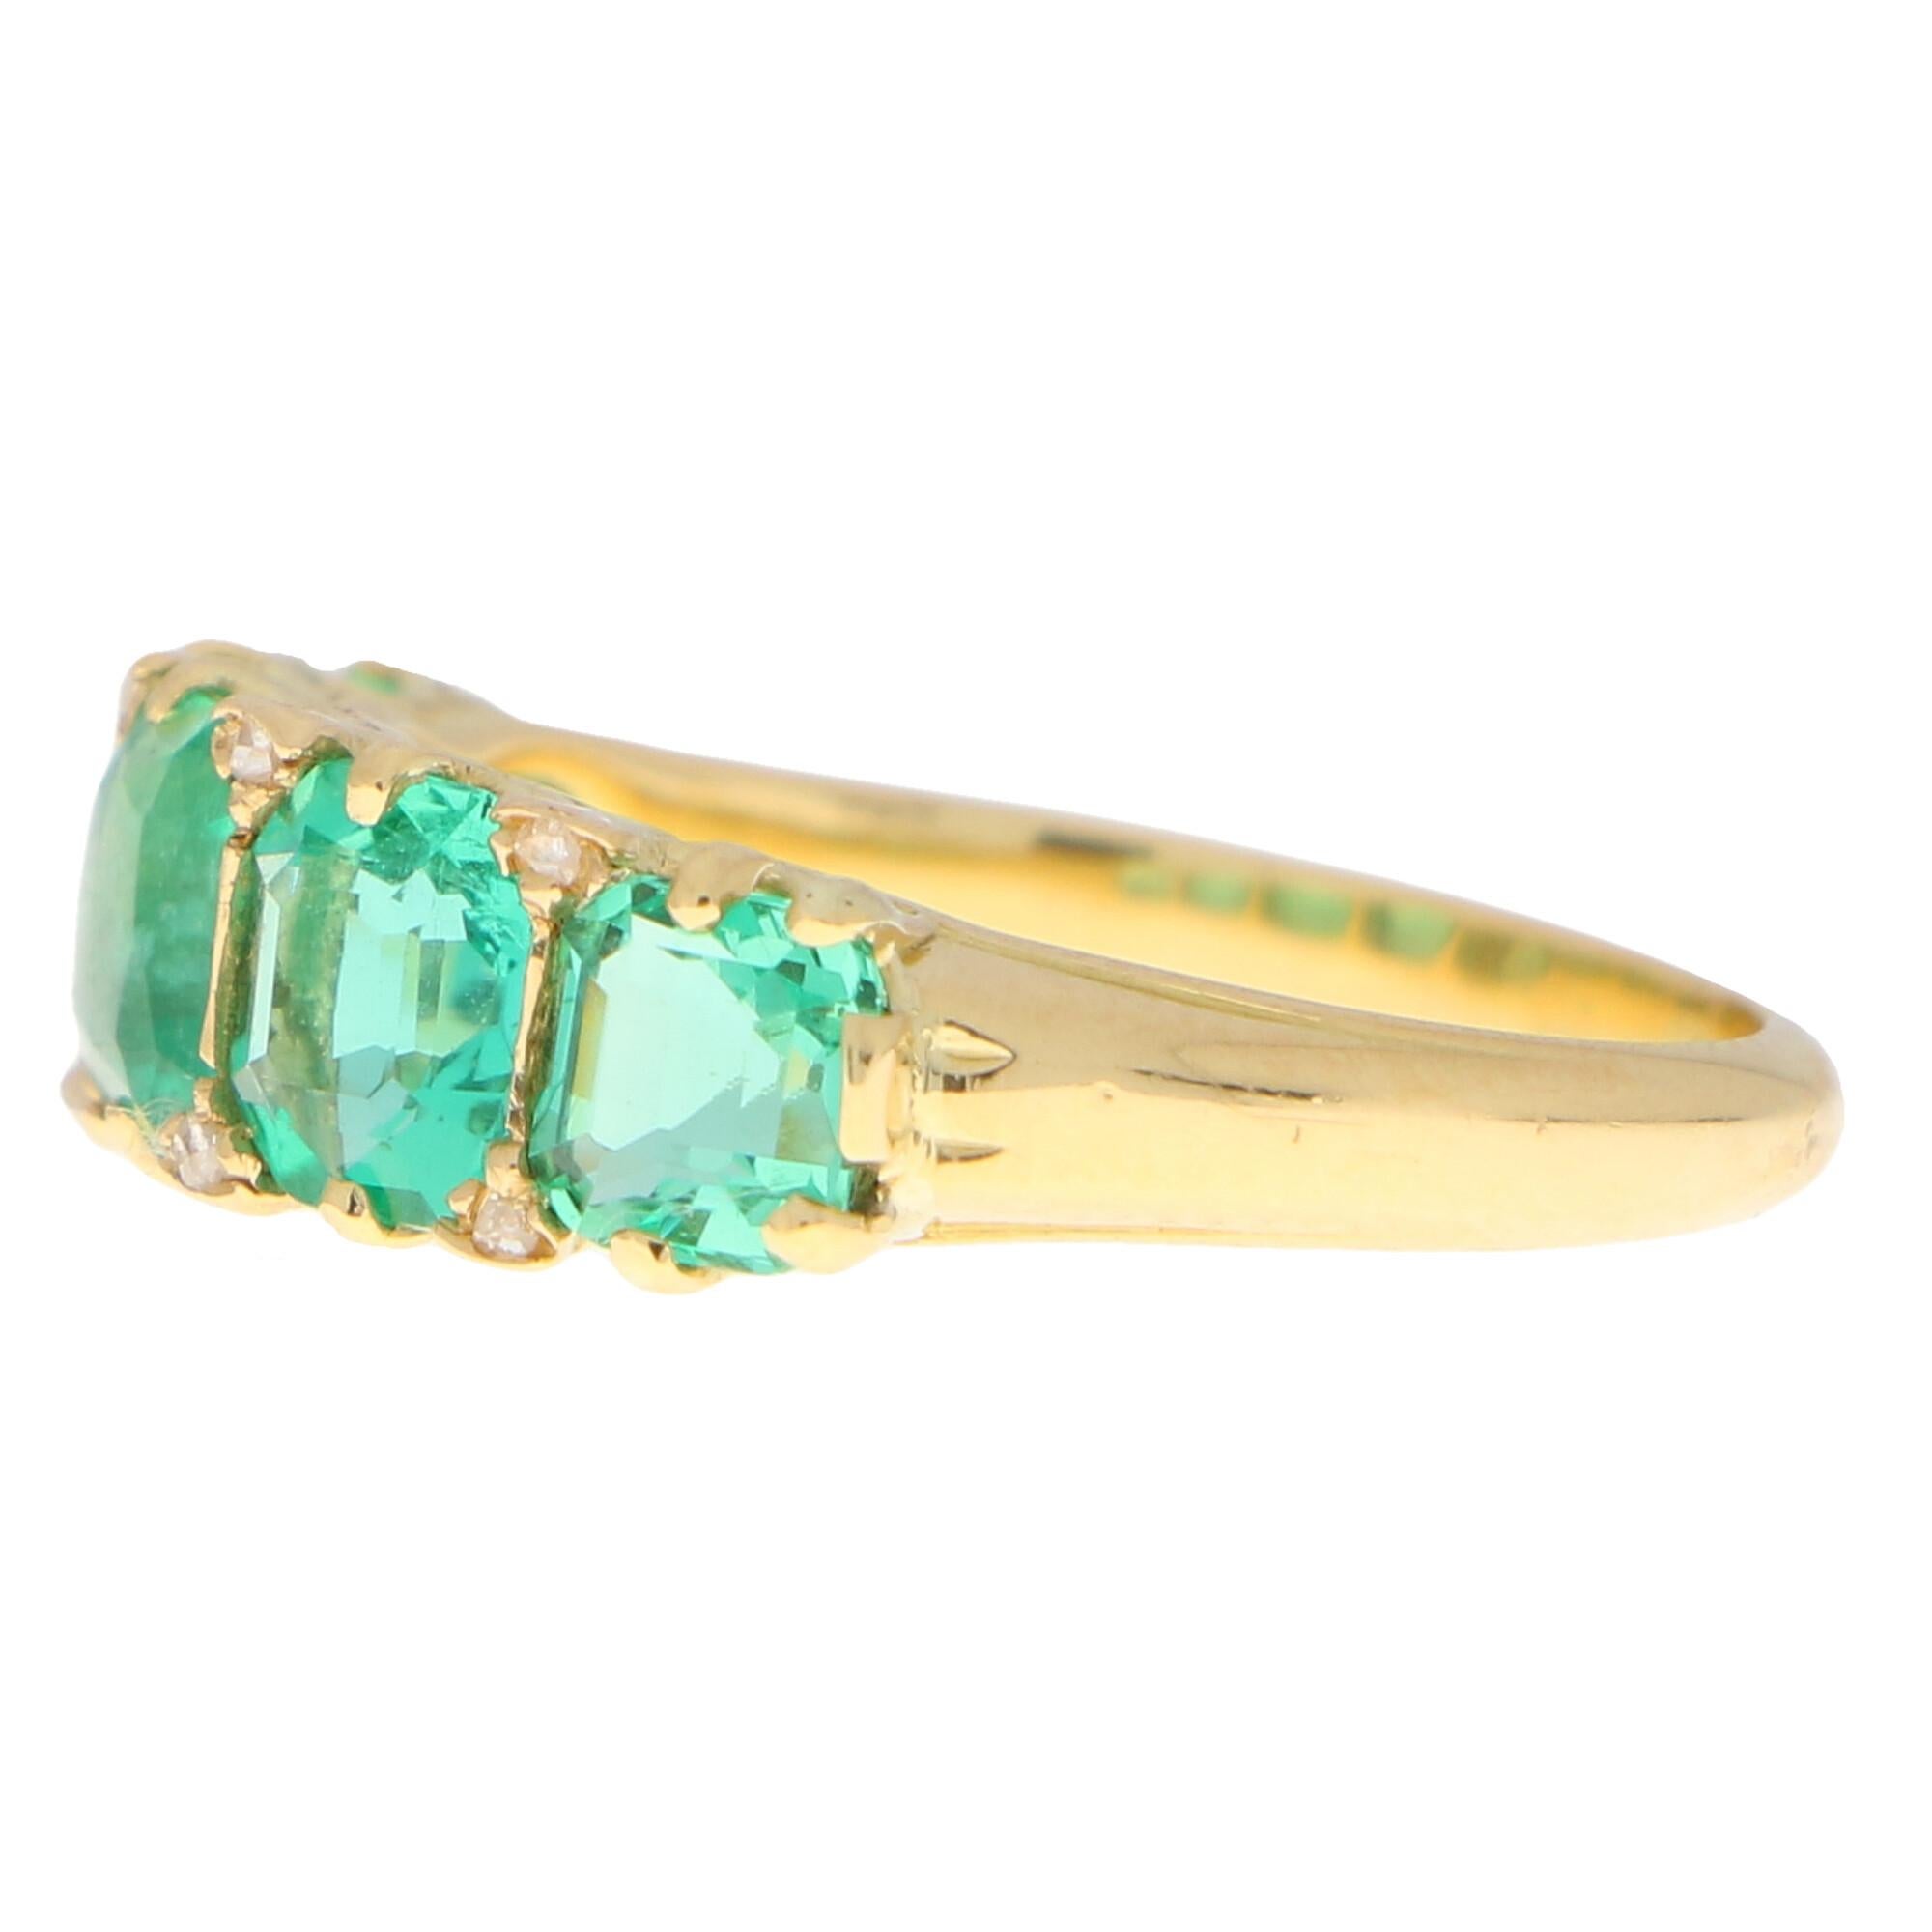 Women's or Men's Late Victorian Emerald and Diamond Five Stone Ring Set in 18k Yellow Gold